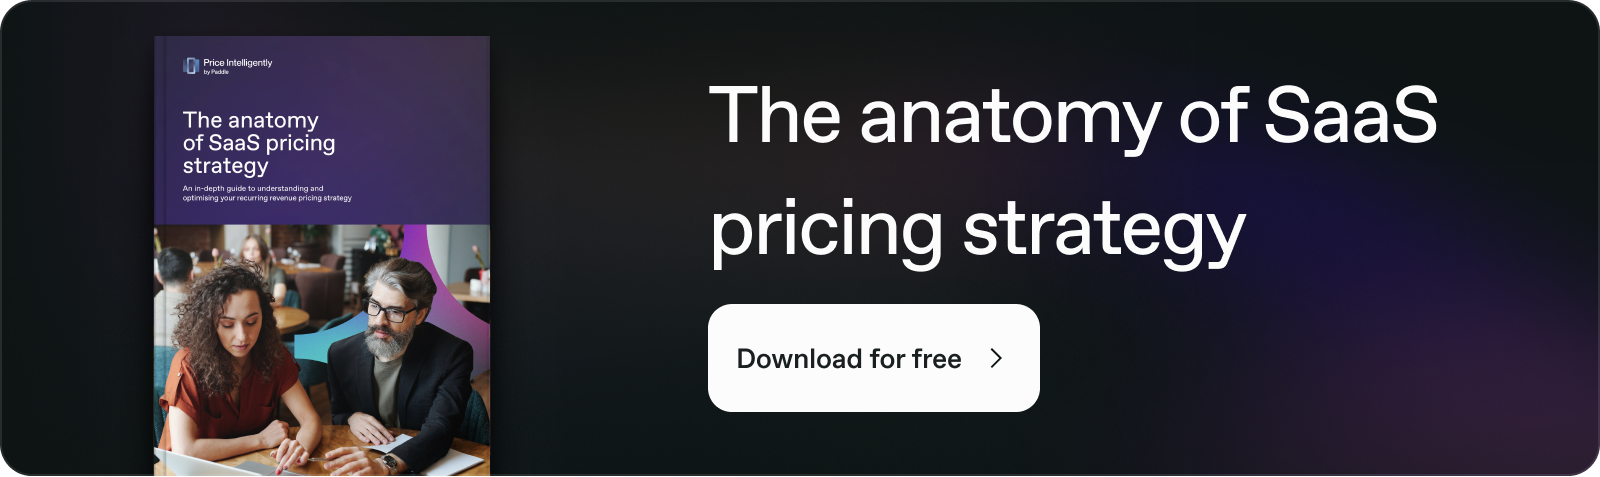 How To Price a Software Product Intelligently - Software Pricing Guide